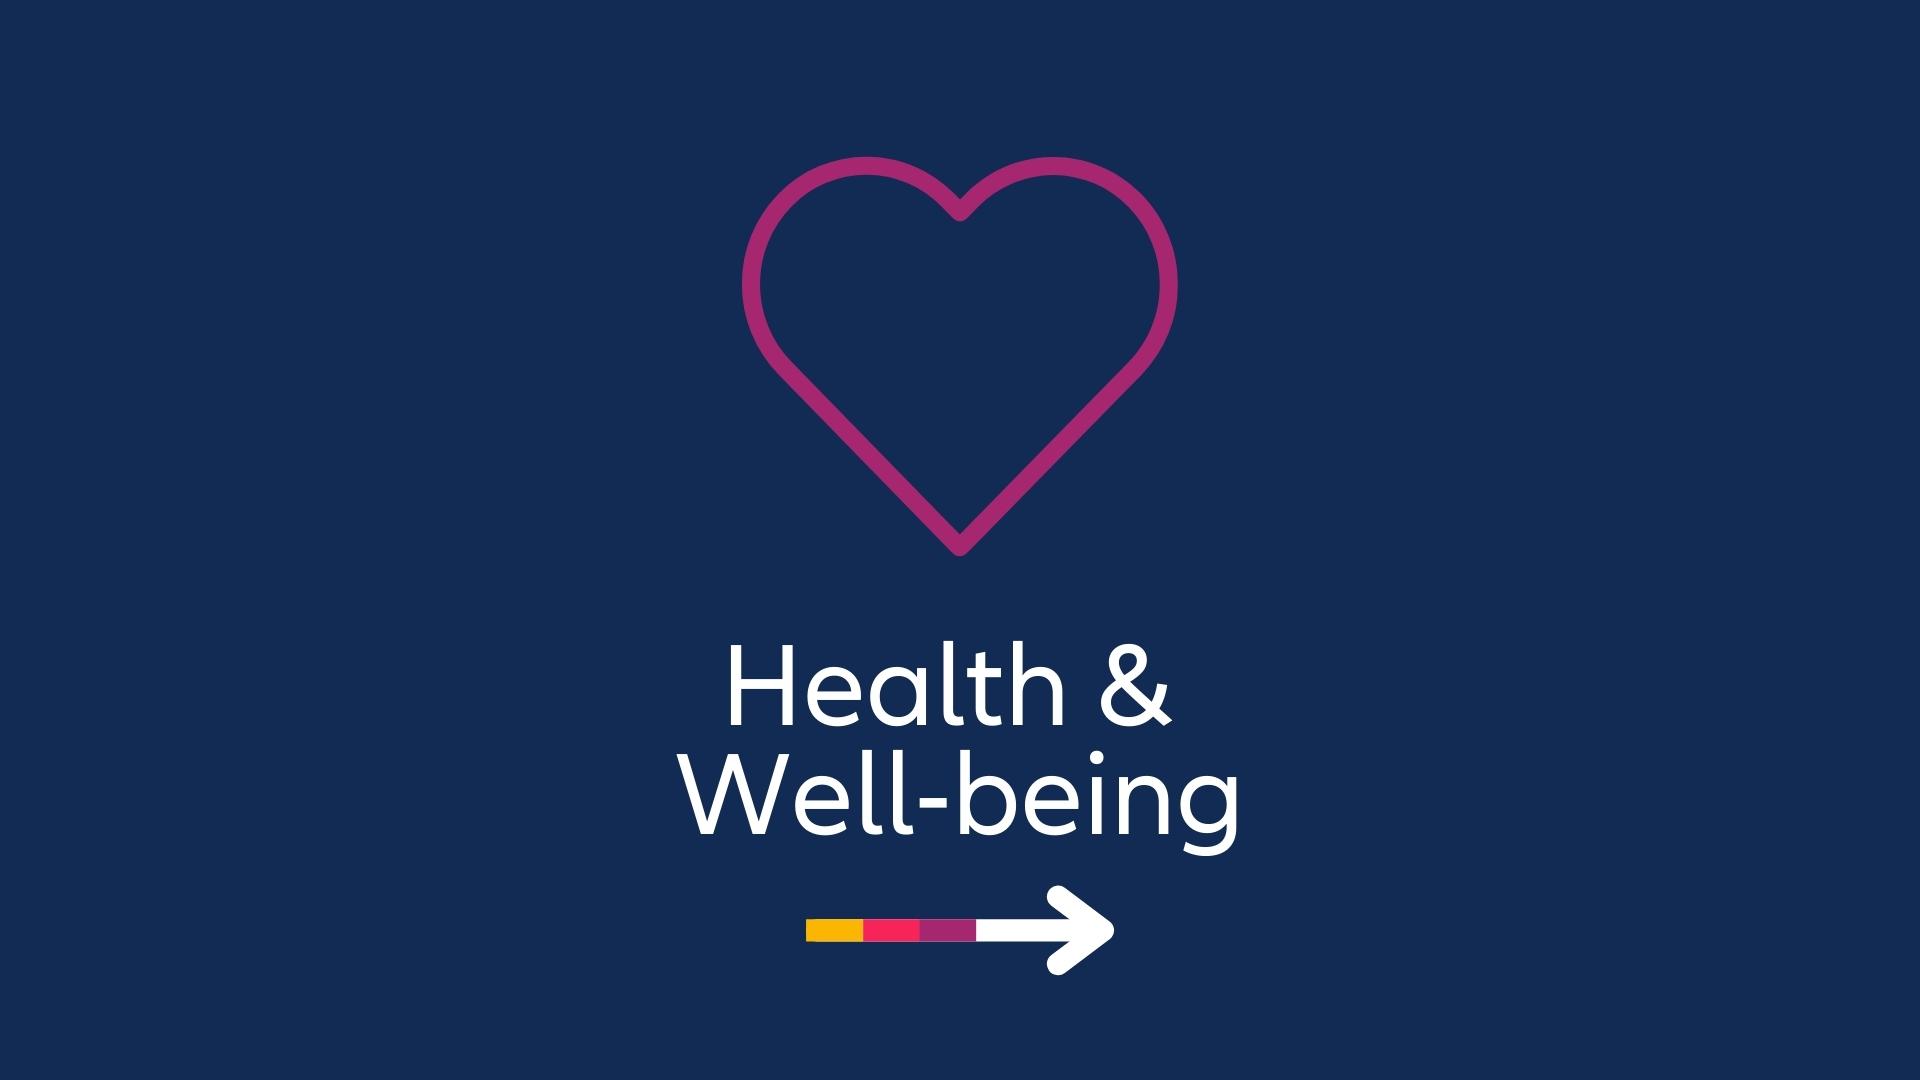 Health & Well-being, heart icon